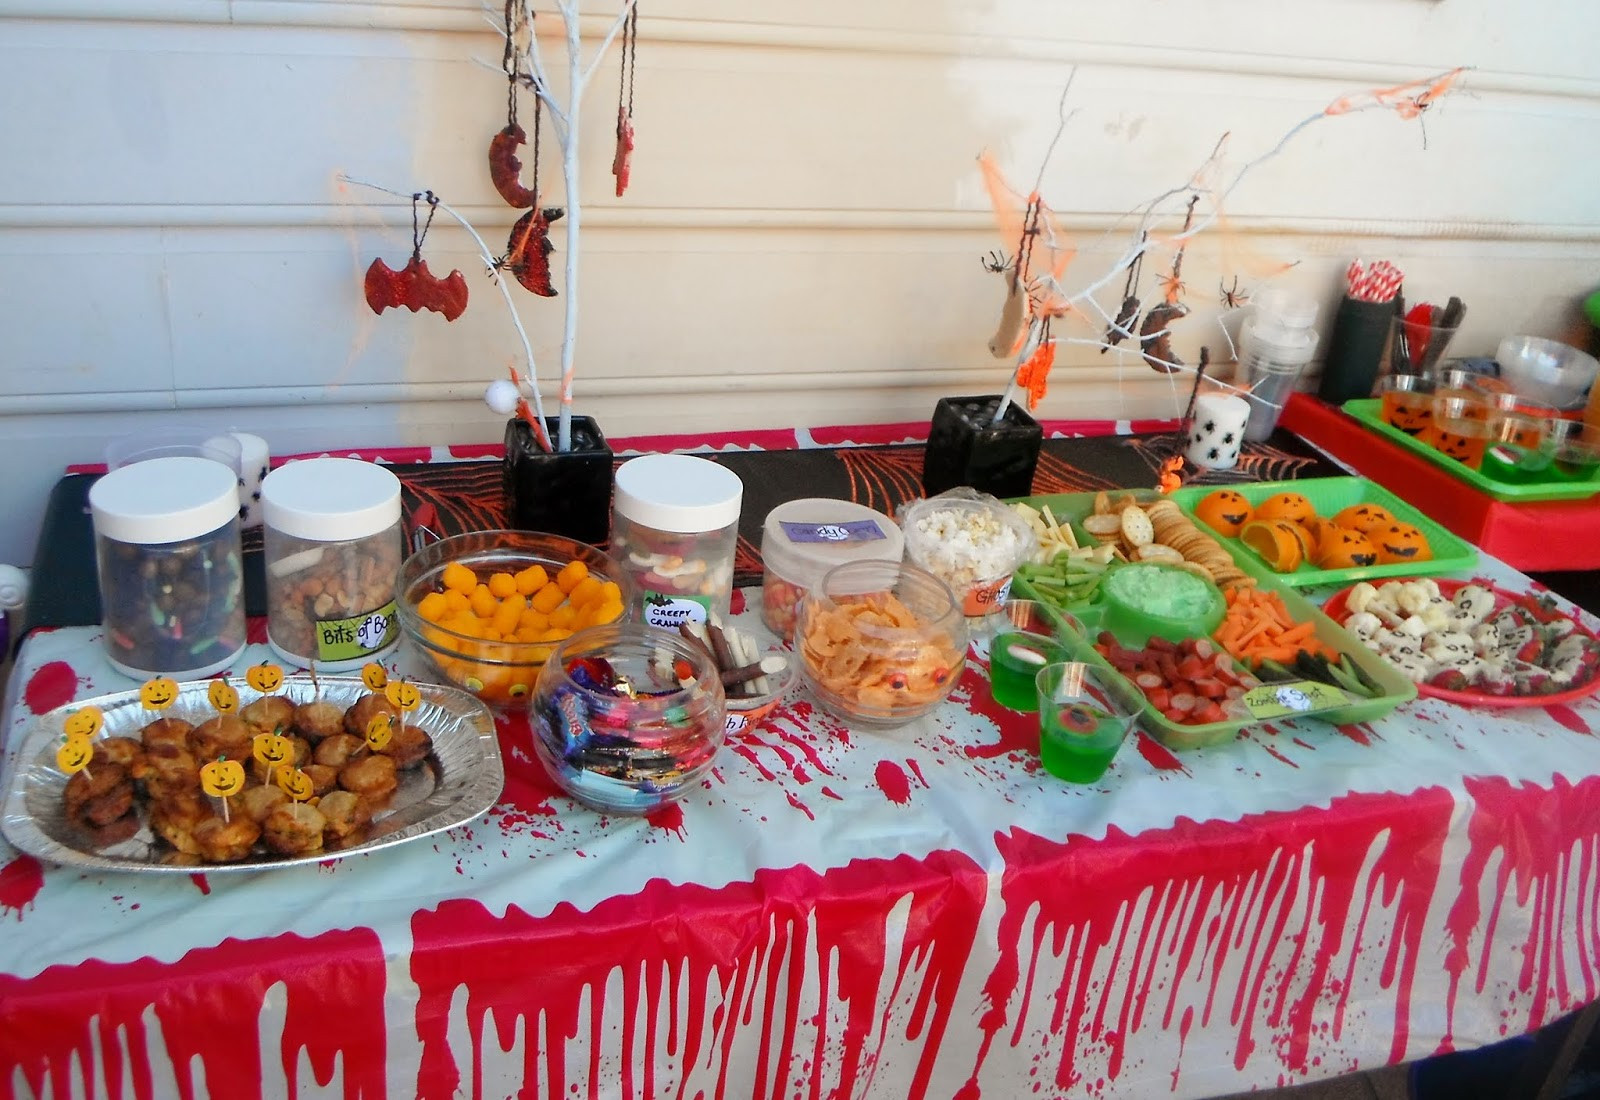 Birthday Halloween Party Ideas
 Adventures at home with Mum Halloween Party Food